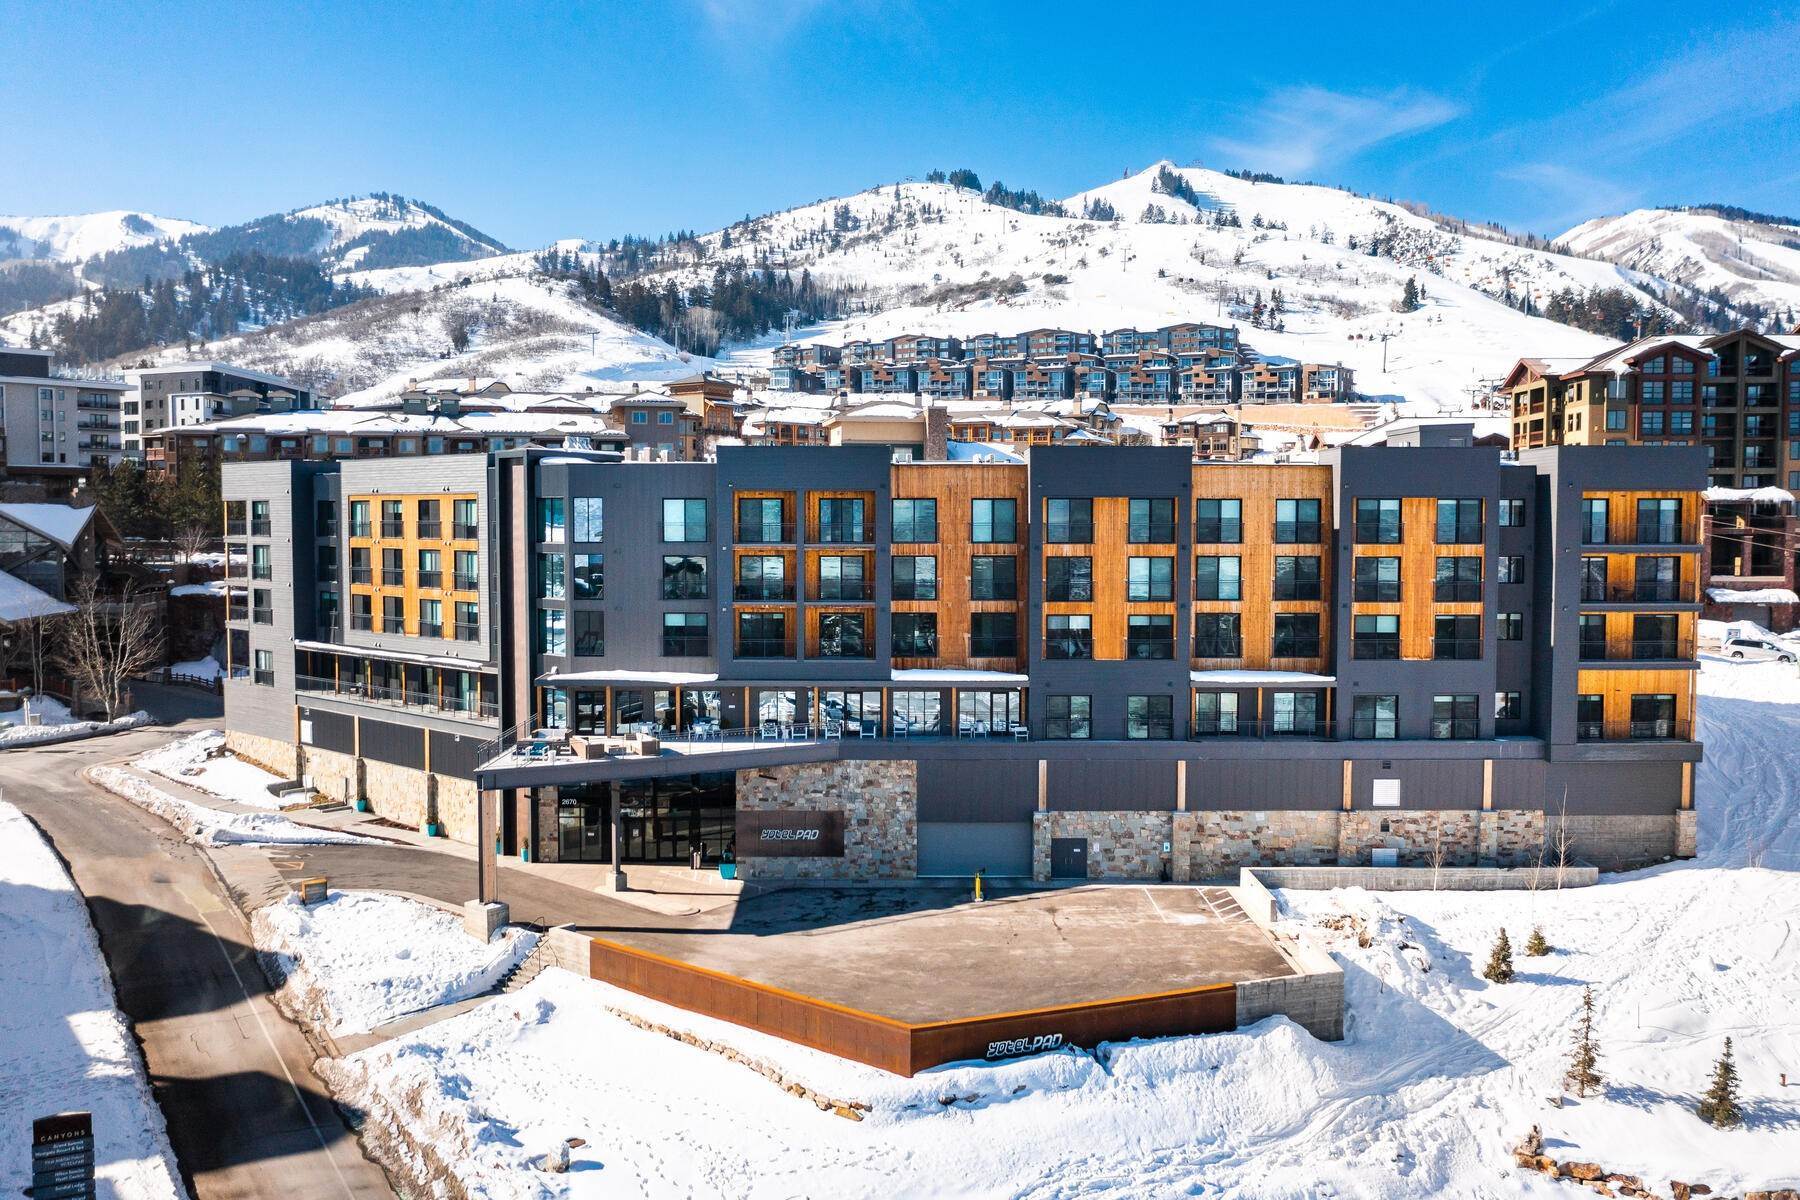 Property for Sale at Highly Sought After Top Floor 2 Bedroom YOTELPAD With Down Valley Views 2670 W Canyons Resort Dr #435 Park City, Utah 84098 United States